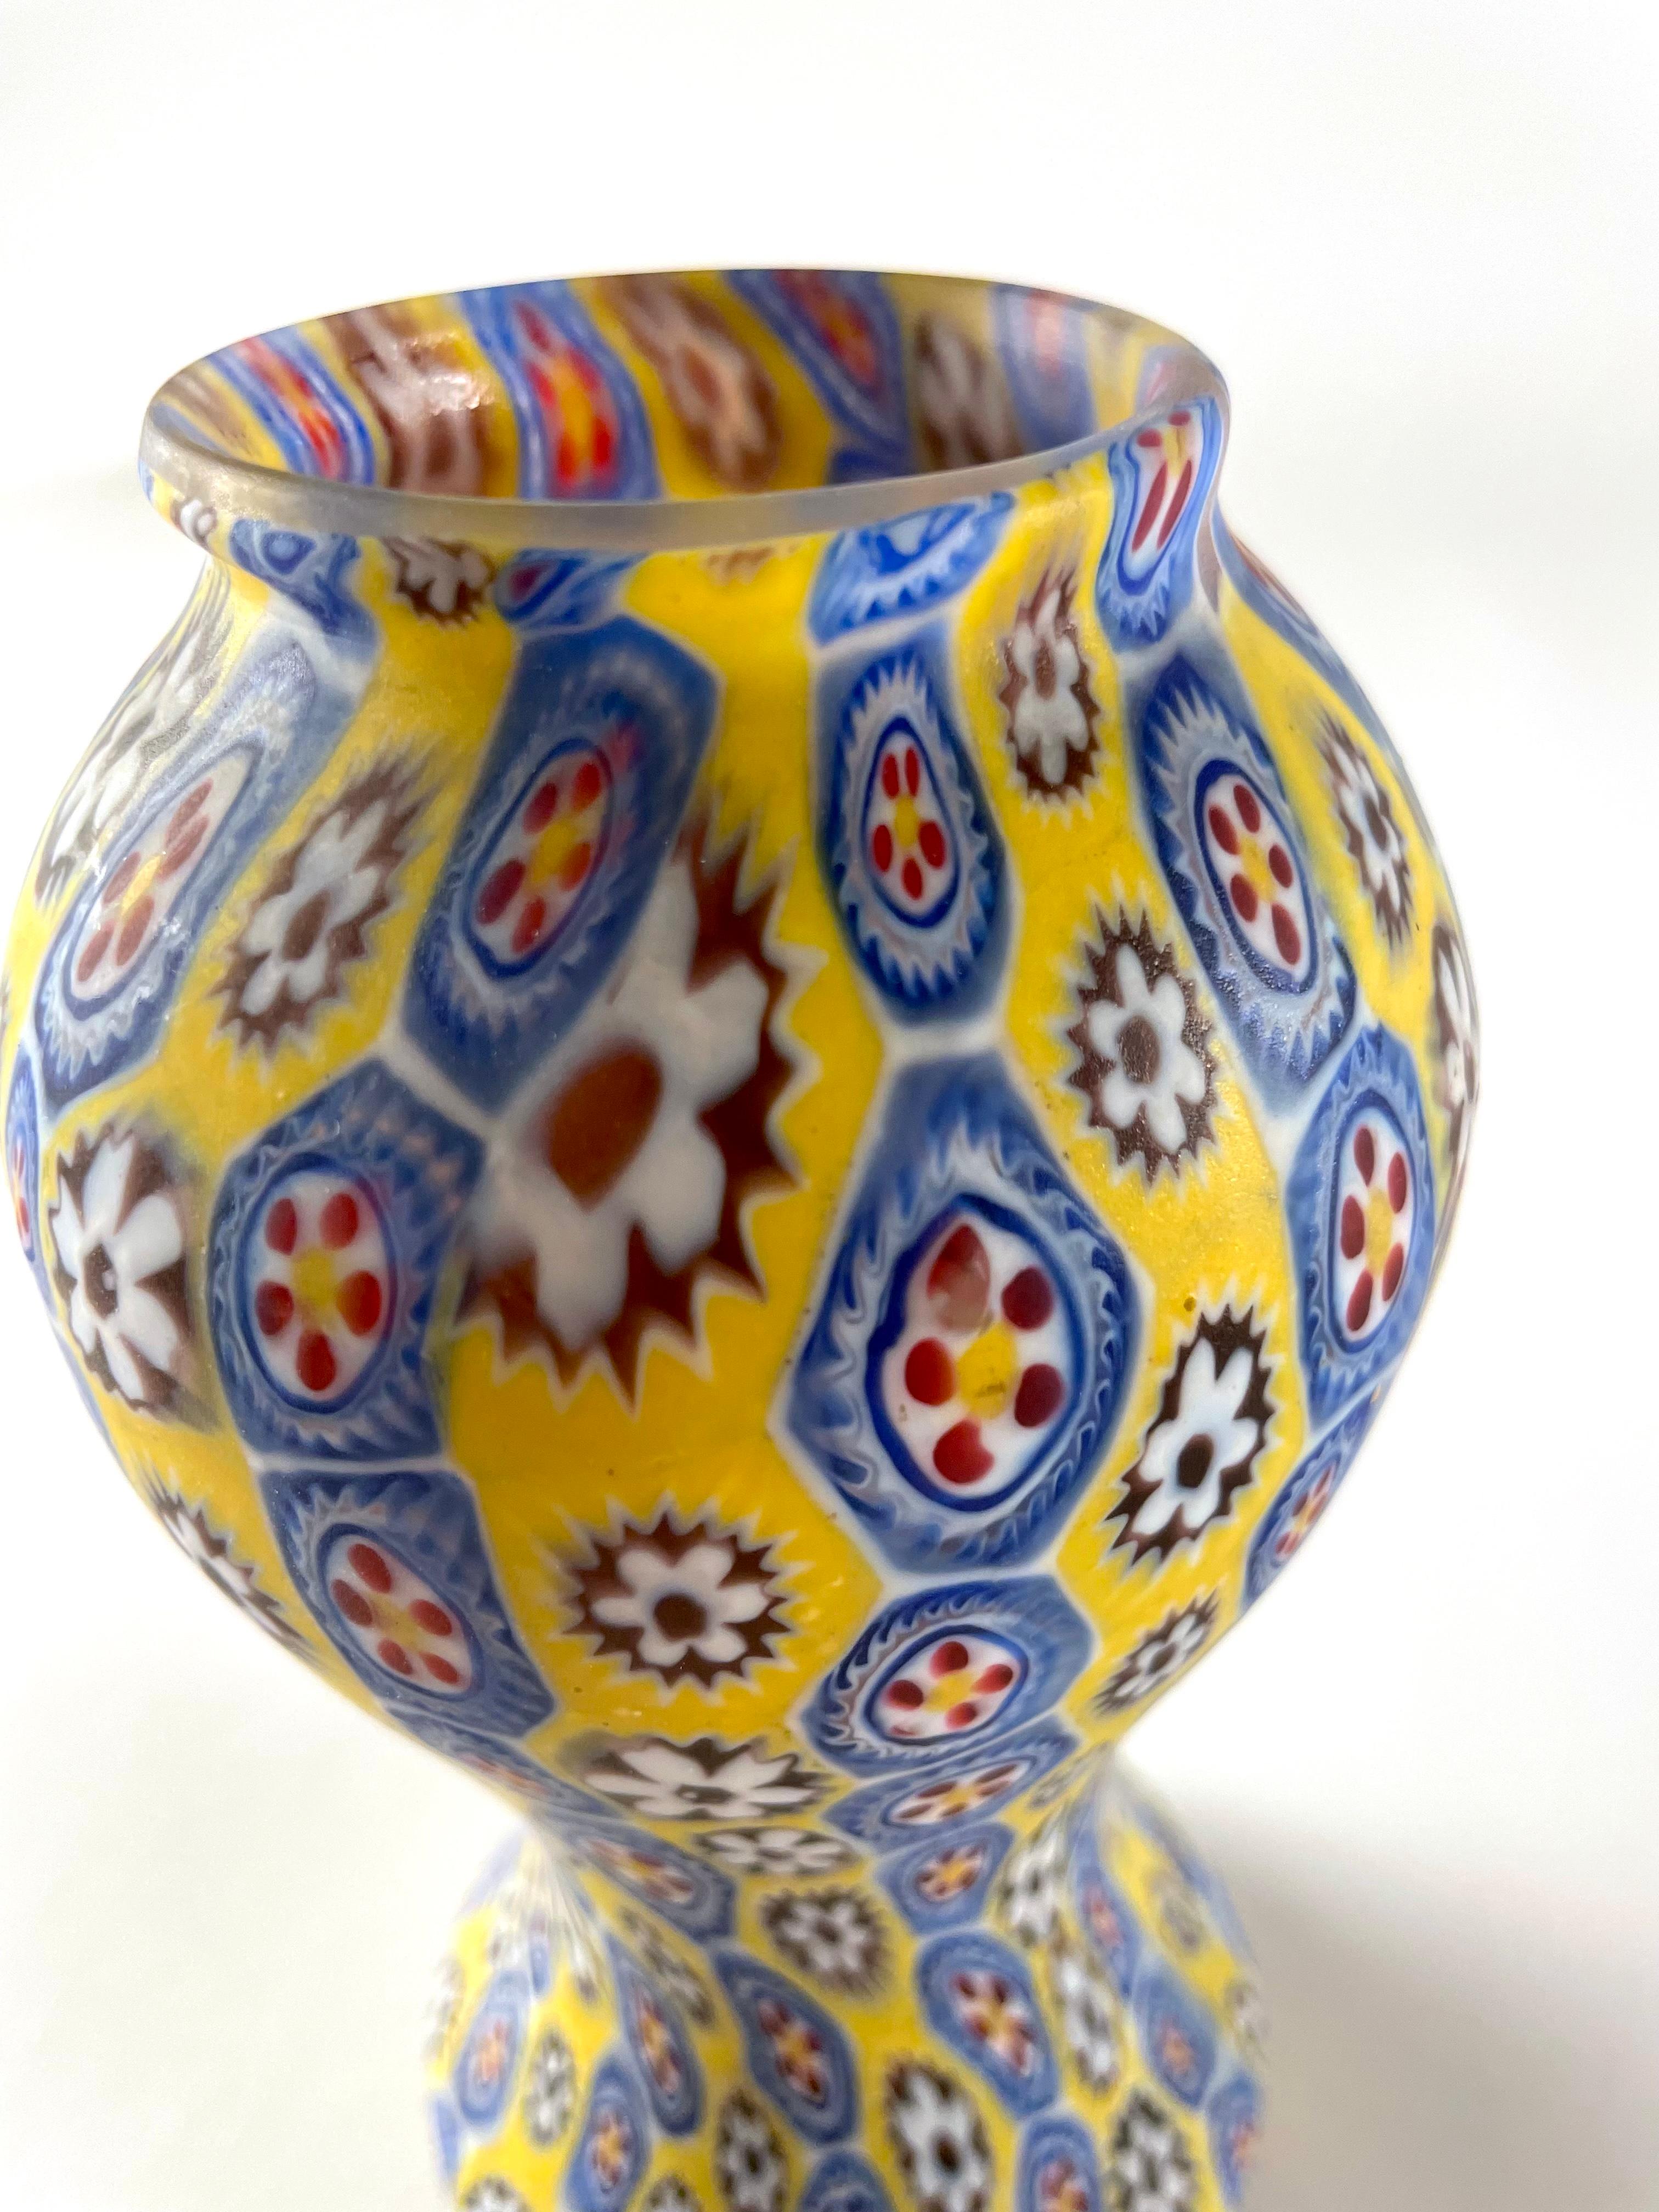 A classic vase in Murrina Millefiori by Fratelli Toso. This classic design hails from the beginning of the '50s and showcases the true craftsmanship that made Fratelli Toso famous. This piece is meticulously crafted using the murrina technique,